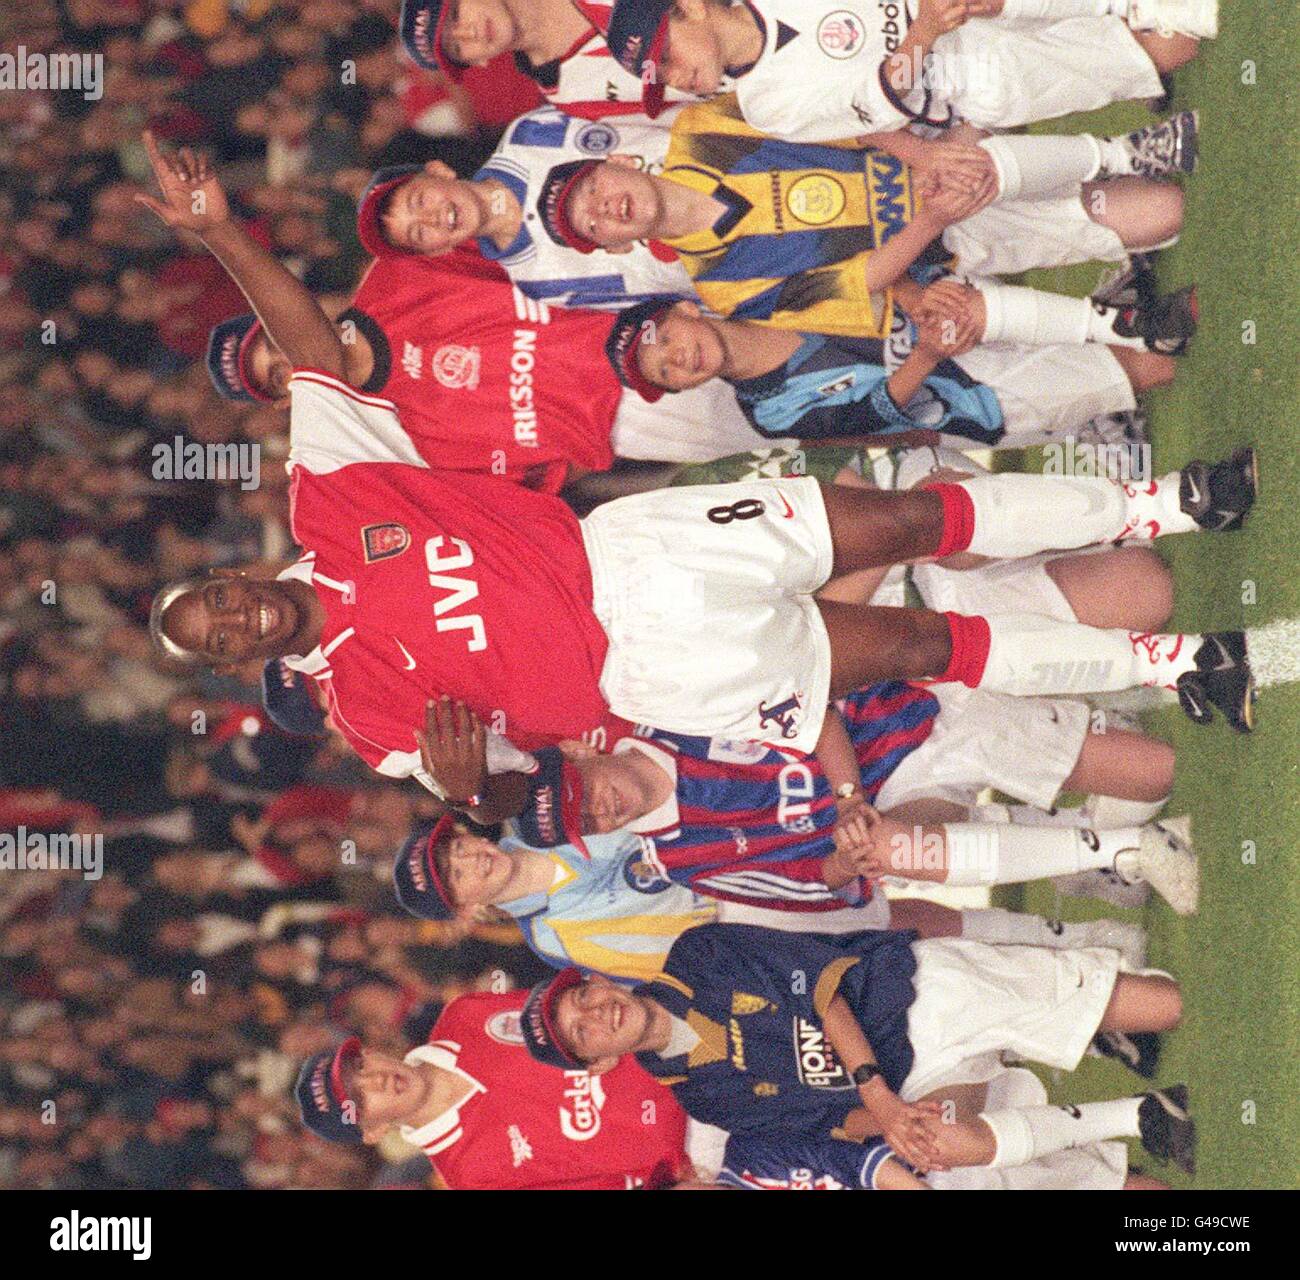 Arsenal FC - Arsenal Number One / Our Goal (single) CD [NH58] UK